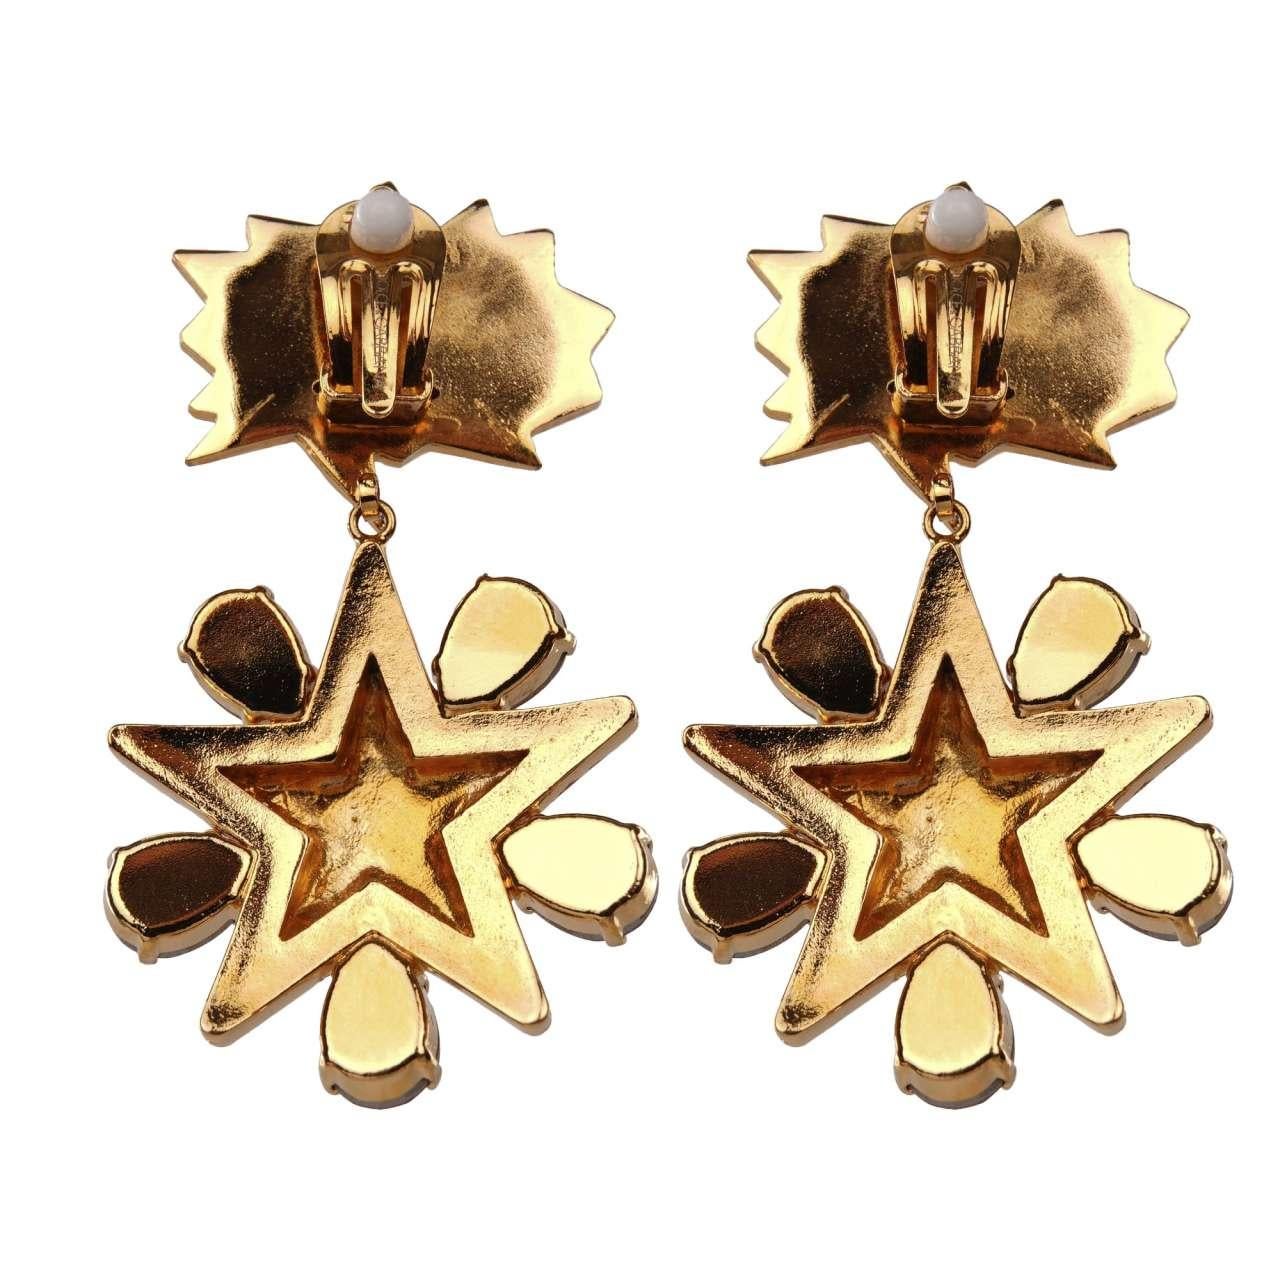 - Fumetti Cartoons STAR Clip Earrings adorned with crystals in red, gold and blue by DOLCE & GABBANA - RUNWAY - Dolce & Gabbana Fashion Show - New with Box - Made in Italy - Gold-plated brass - Clip fastening - Nickel free - Model: